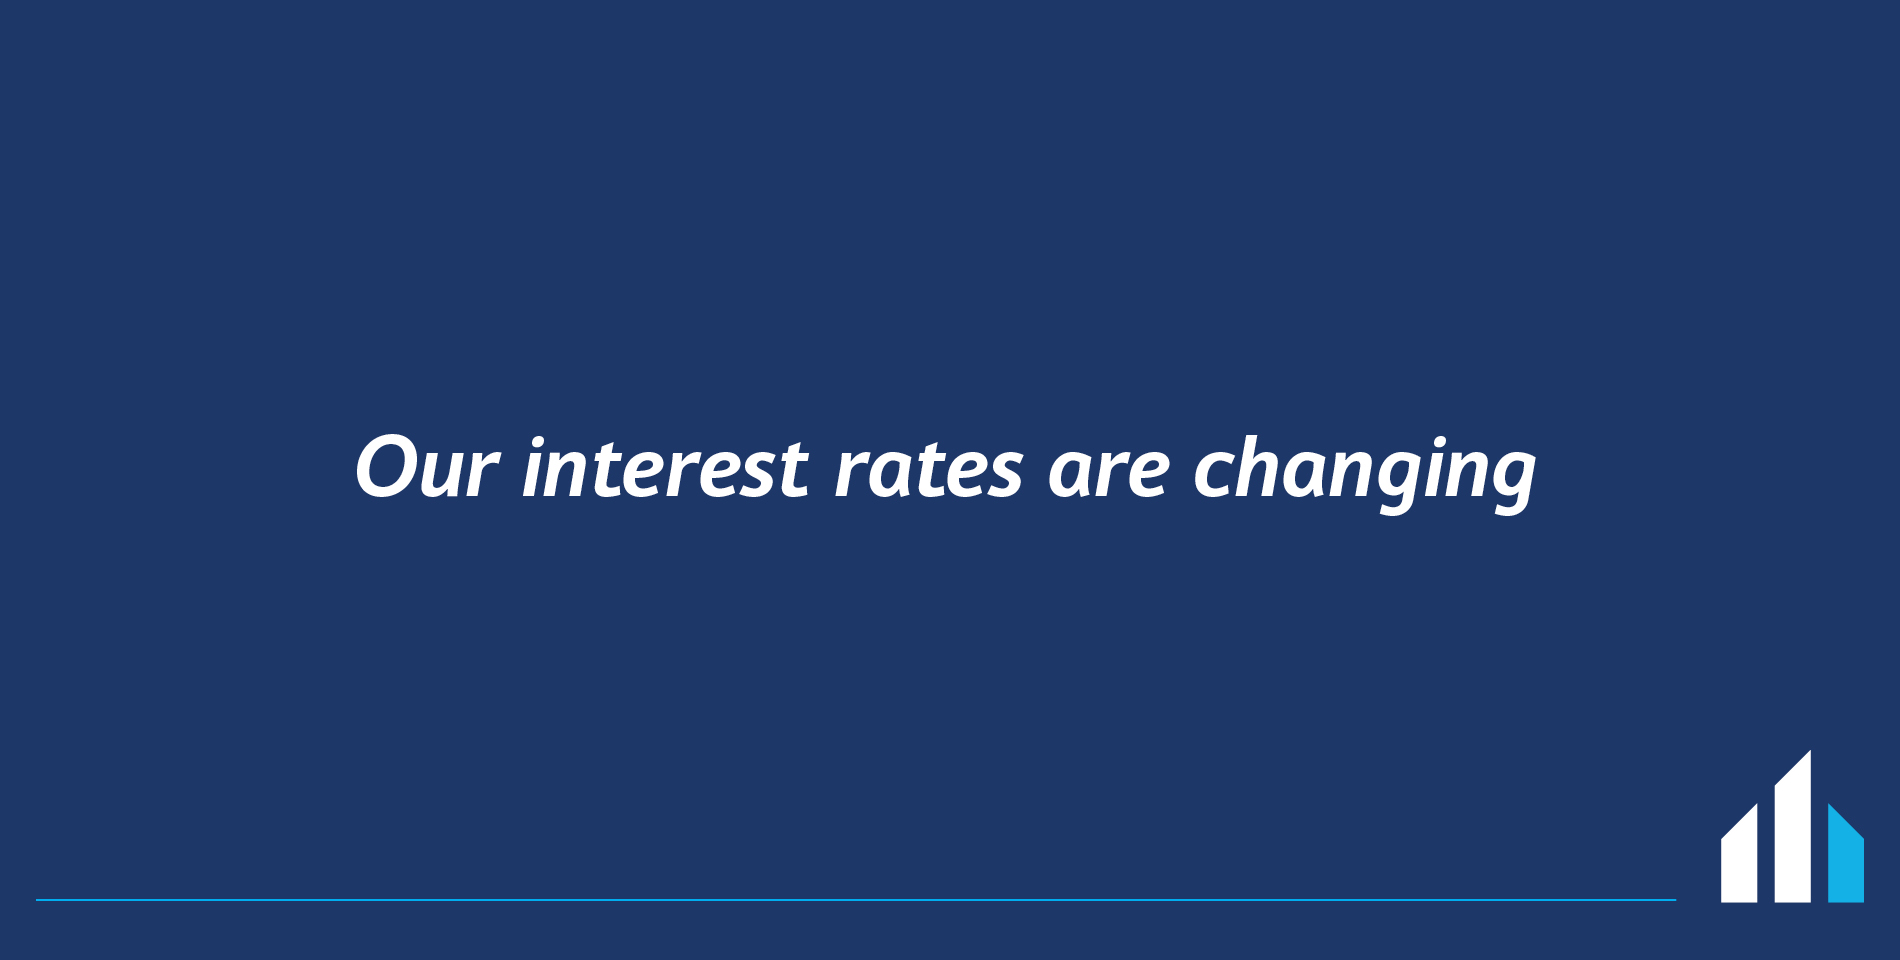 Changes in interest rates